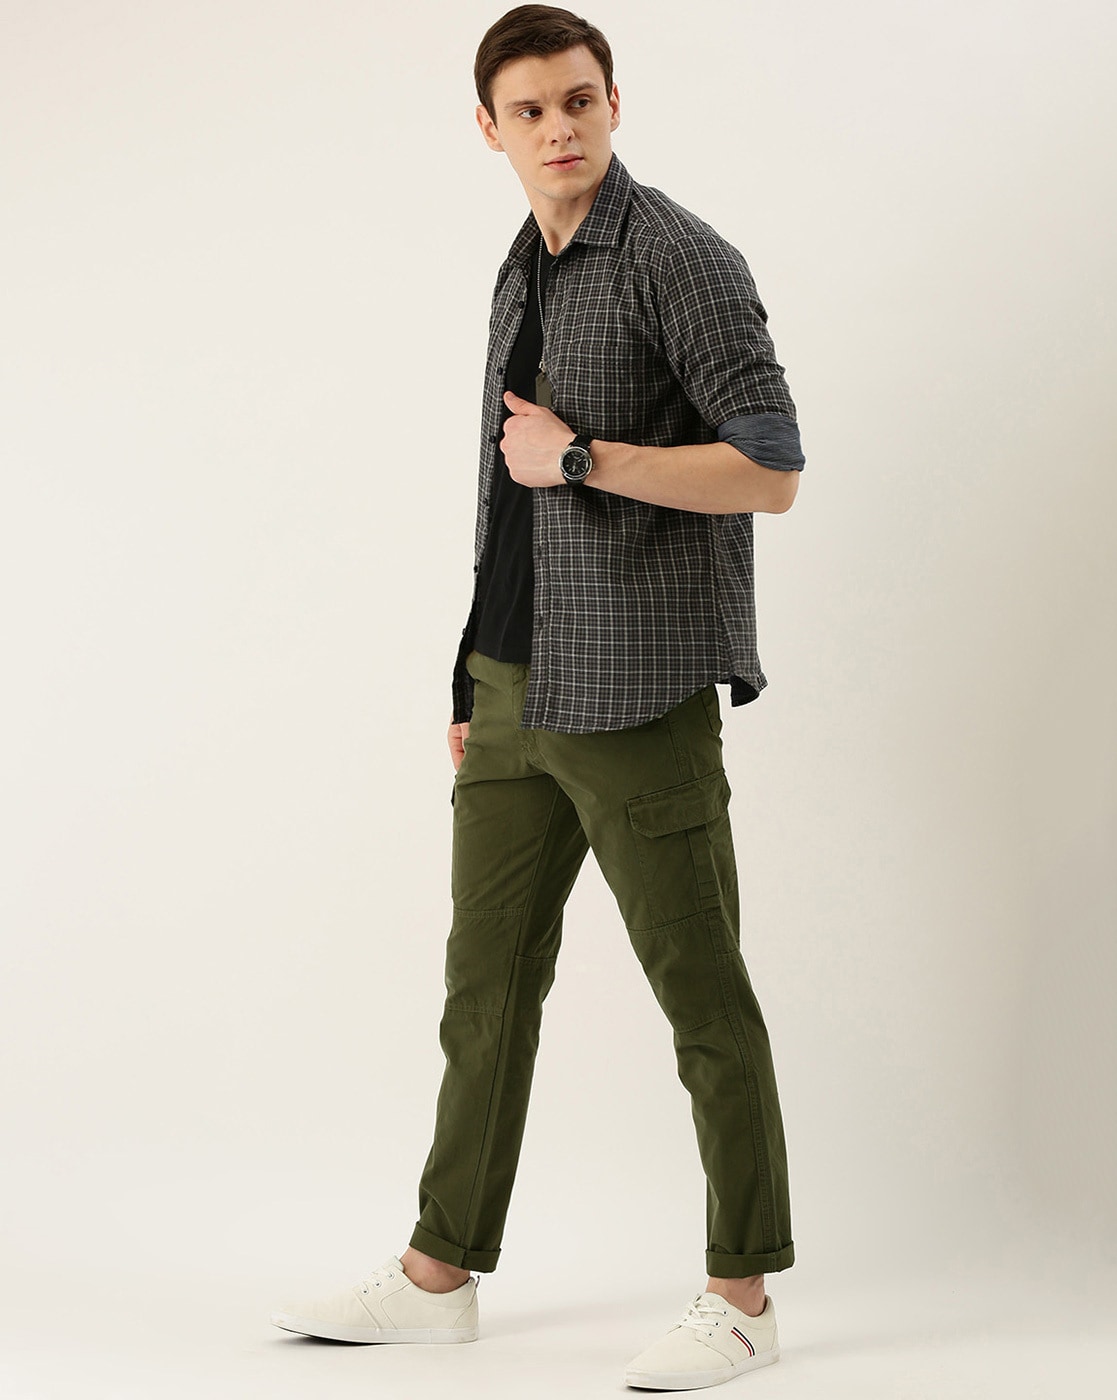 53 Best Men's Green Pants Outfit Ideas for 2022 - Next Luxury